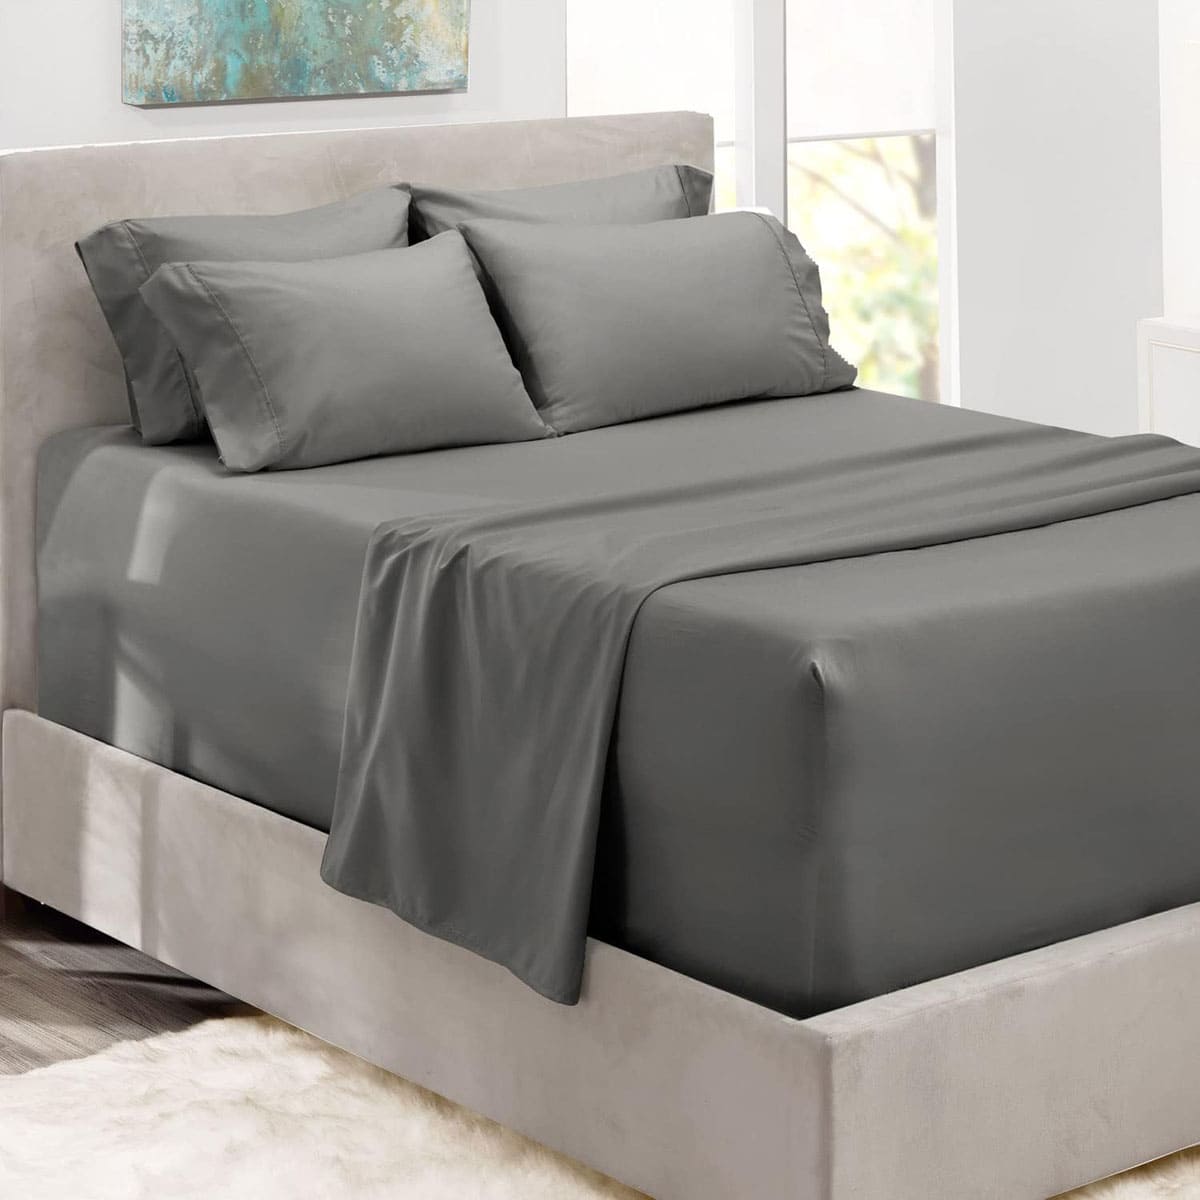 Bedsure King Fitted Sheet Only - Bed Sheets Extra Deep Pocket 16 inch,  Ultra Soft Bottom Sheet for King Size Bed, Light Grey, 78 x 80